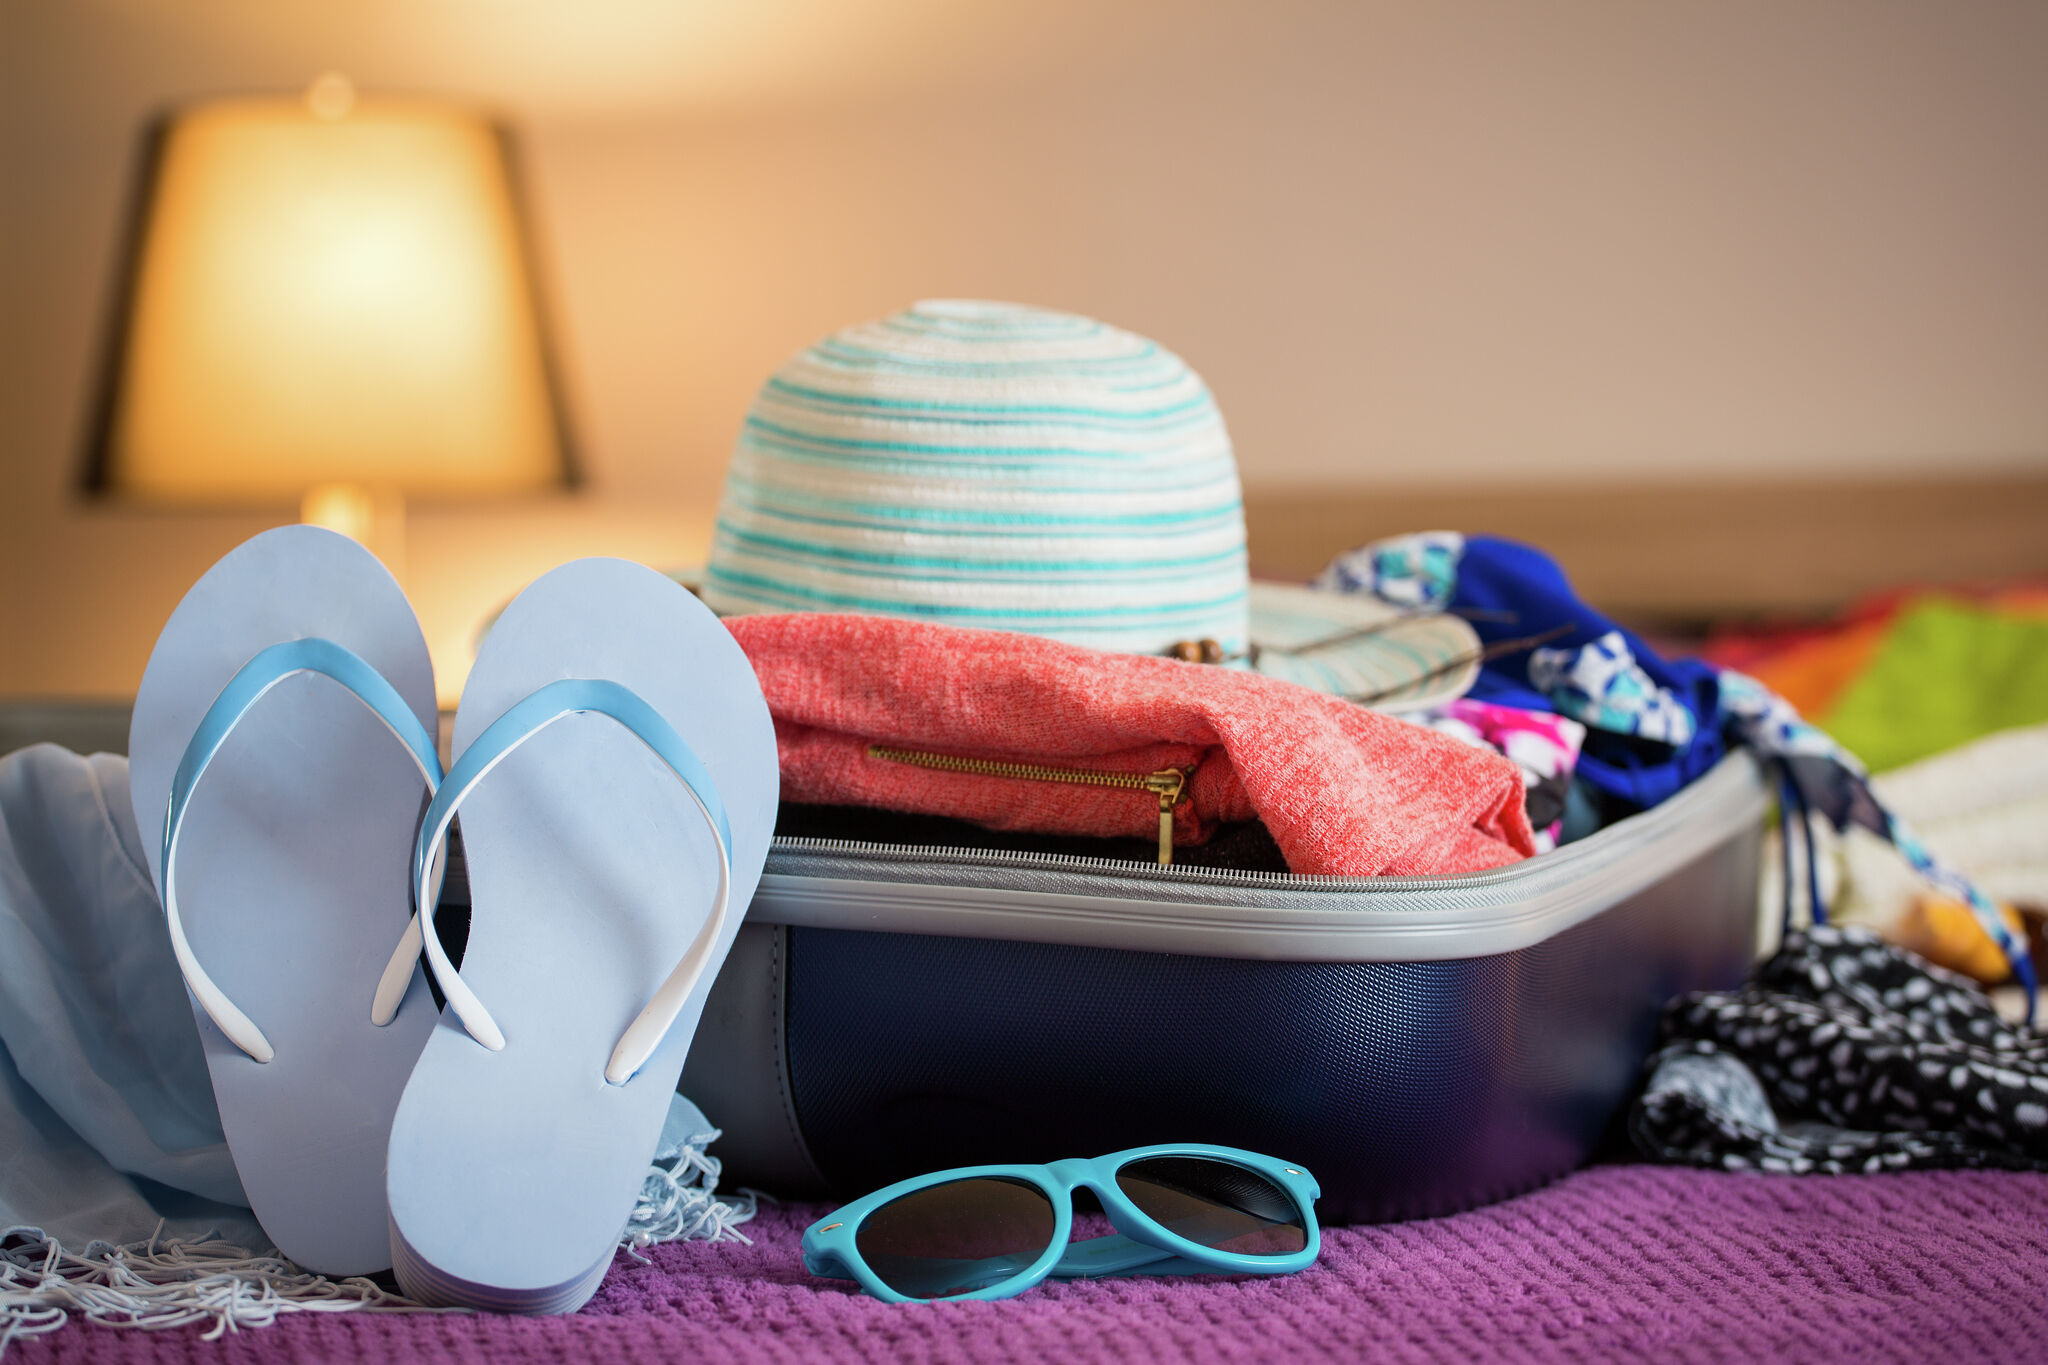 10 things you need to pack for your next cruise vacation